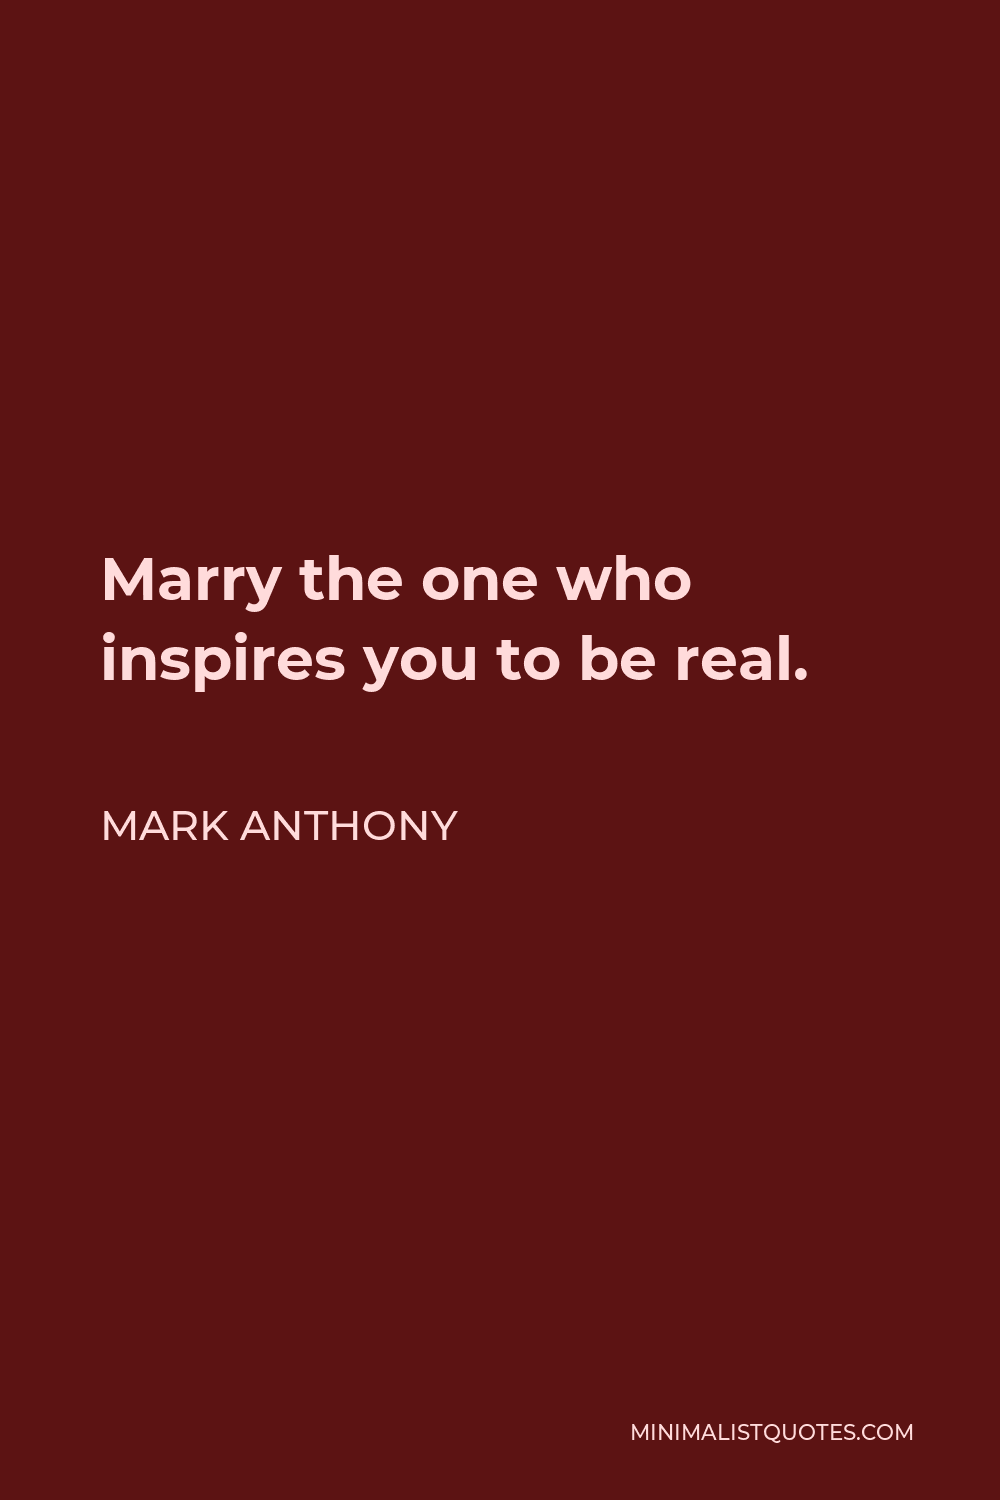 Mark Anthony Quote: Marry the one who inspires you to be real.